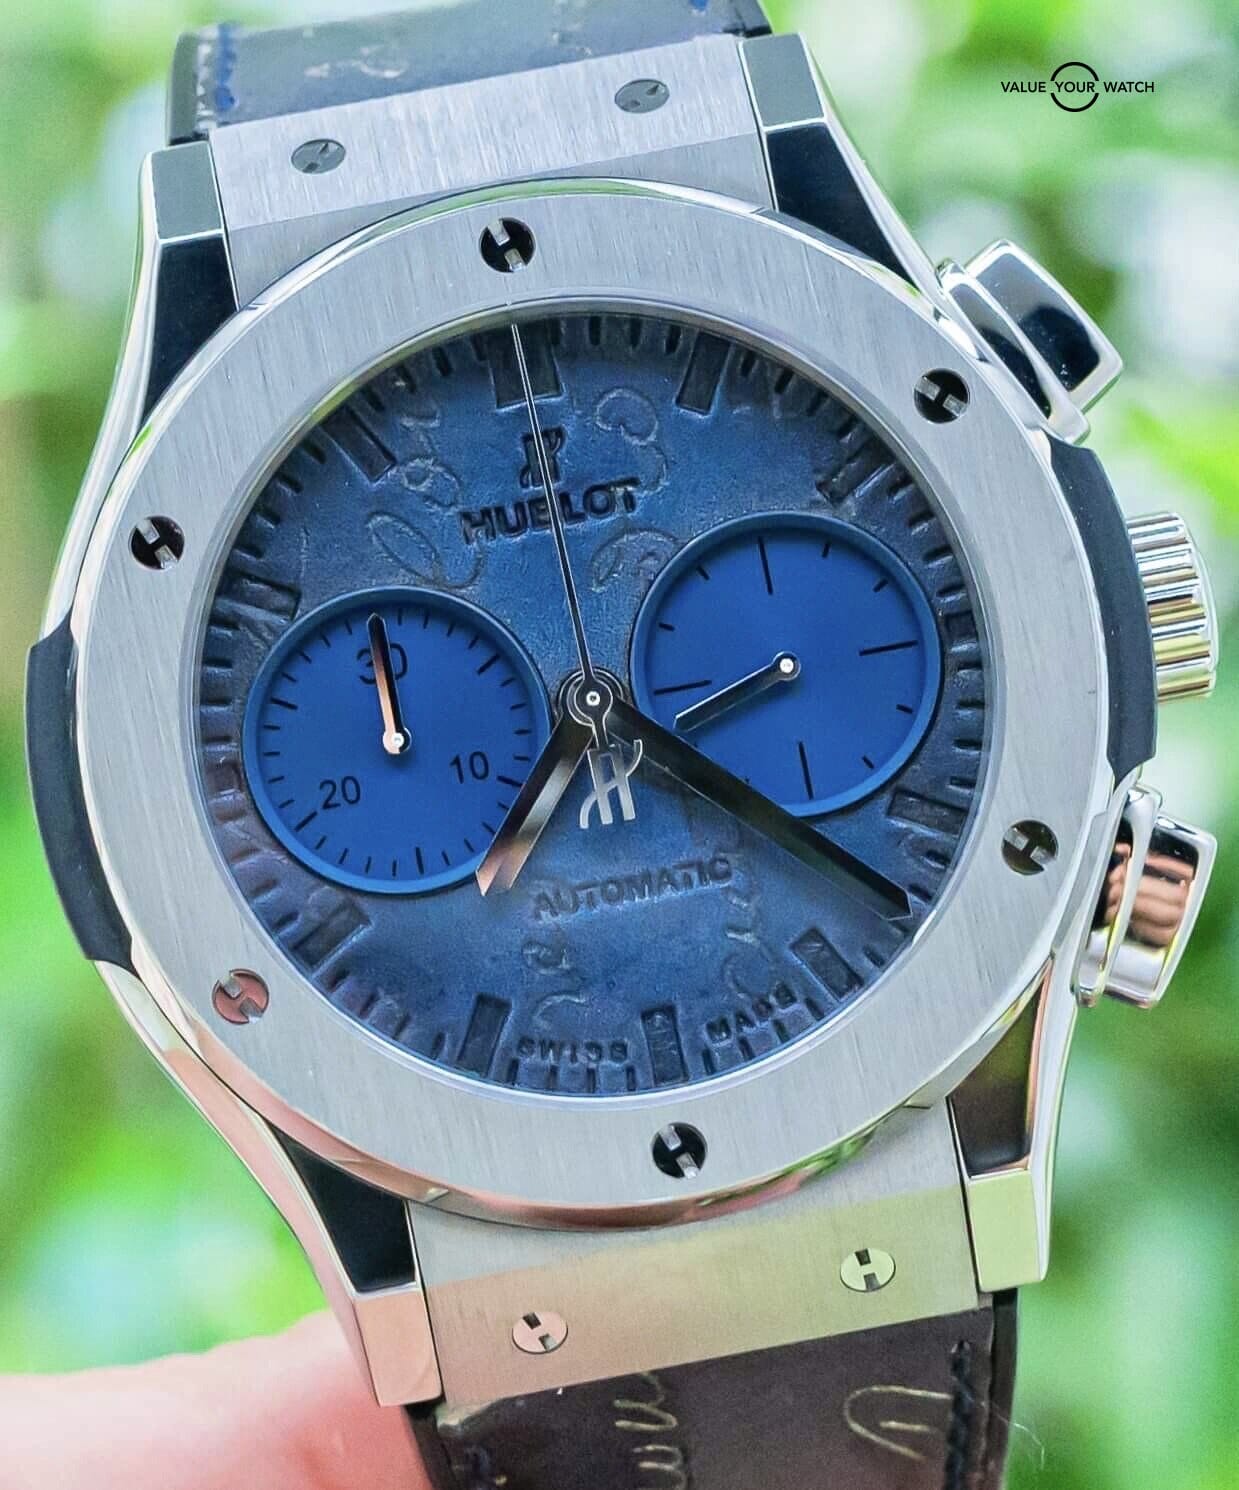 Hublot Classic Fusion Chronograph 45 Berluti Scritto Blue  521.NX.050B.VR.JBER17 - A stunning luxury watch for sale on Value Your  Watch.